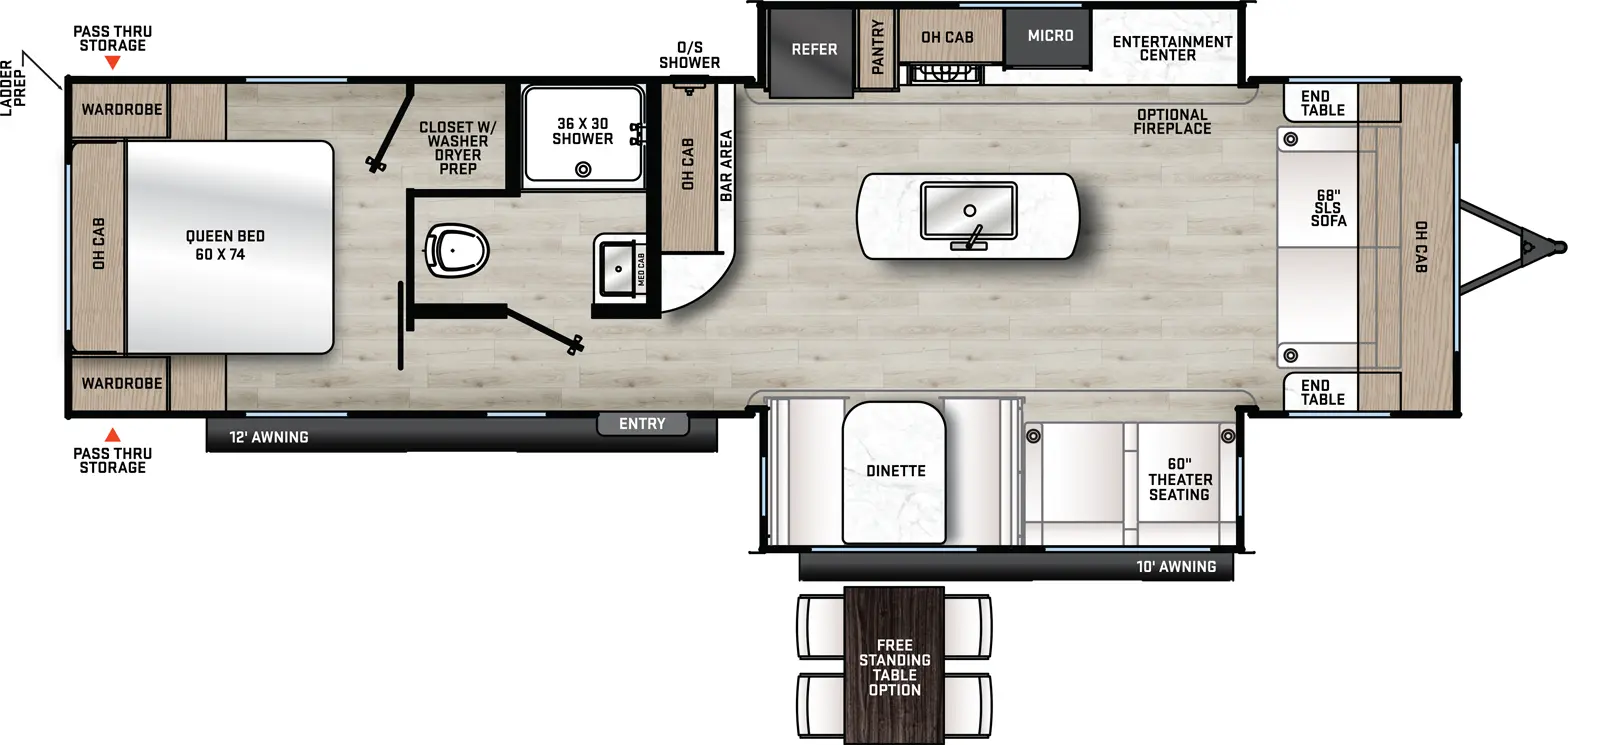 The 28FDS has two slideouts and one entry. Exterior features rear pass-thru storage, ladder prep, outside shower, 12 foot awning, and 10 foot awning. Interior layout front to back: SLS sofa with overhead cabinet and end tables on each side; off-door side slideout with entertainment center with optional fireplace, kitchen counter, microwave, cooktop, overhead cabinet, pantry, and refrigerator; kitchen island with sink; door side slideout with theater seating and dinette (optional free-standing dinette); bar area with overhead cabinet along inner wall; off-door side full bathroom with medicine cabinet; door side entry; rear bedroom with off-door side closet with washer/dryer prep, and rear front-facing queen bed with overhead cabinet and wardrobes on each side.